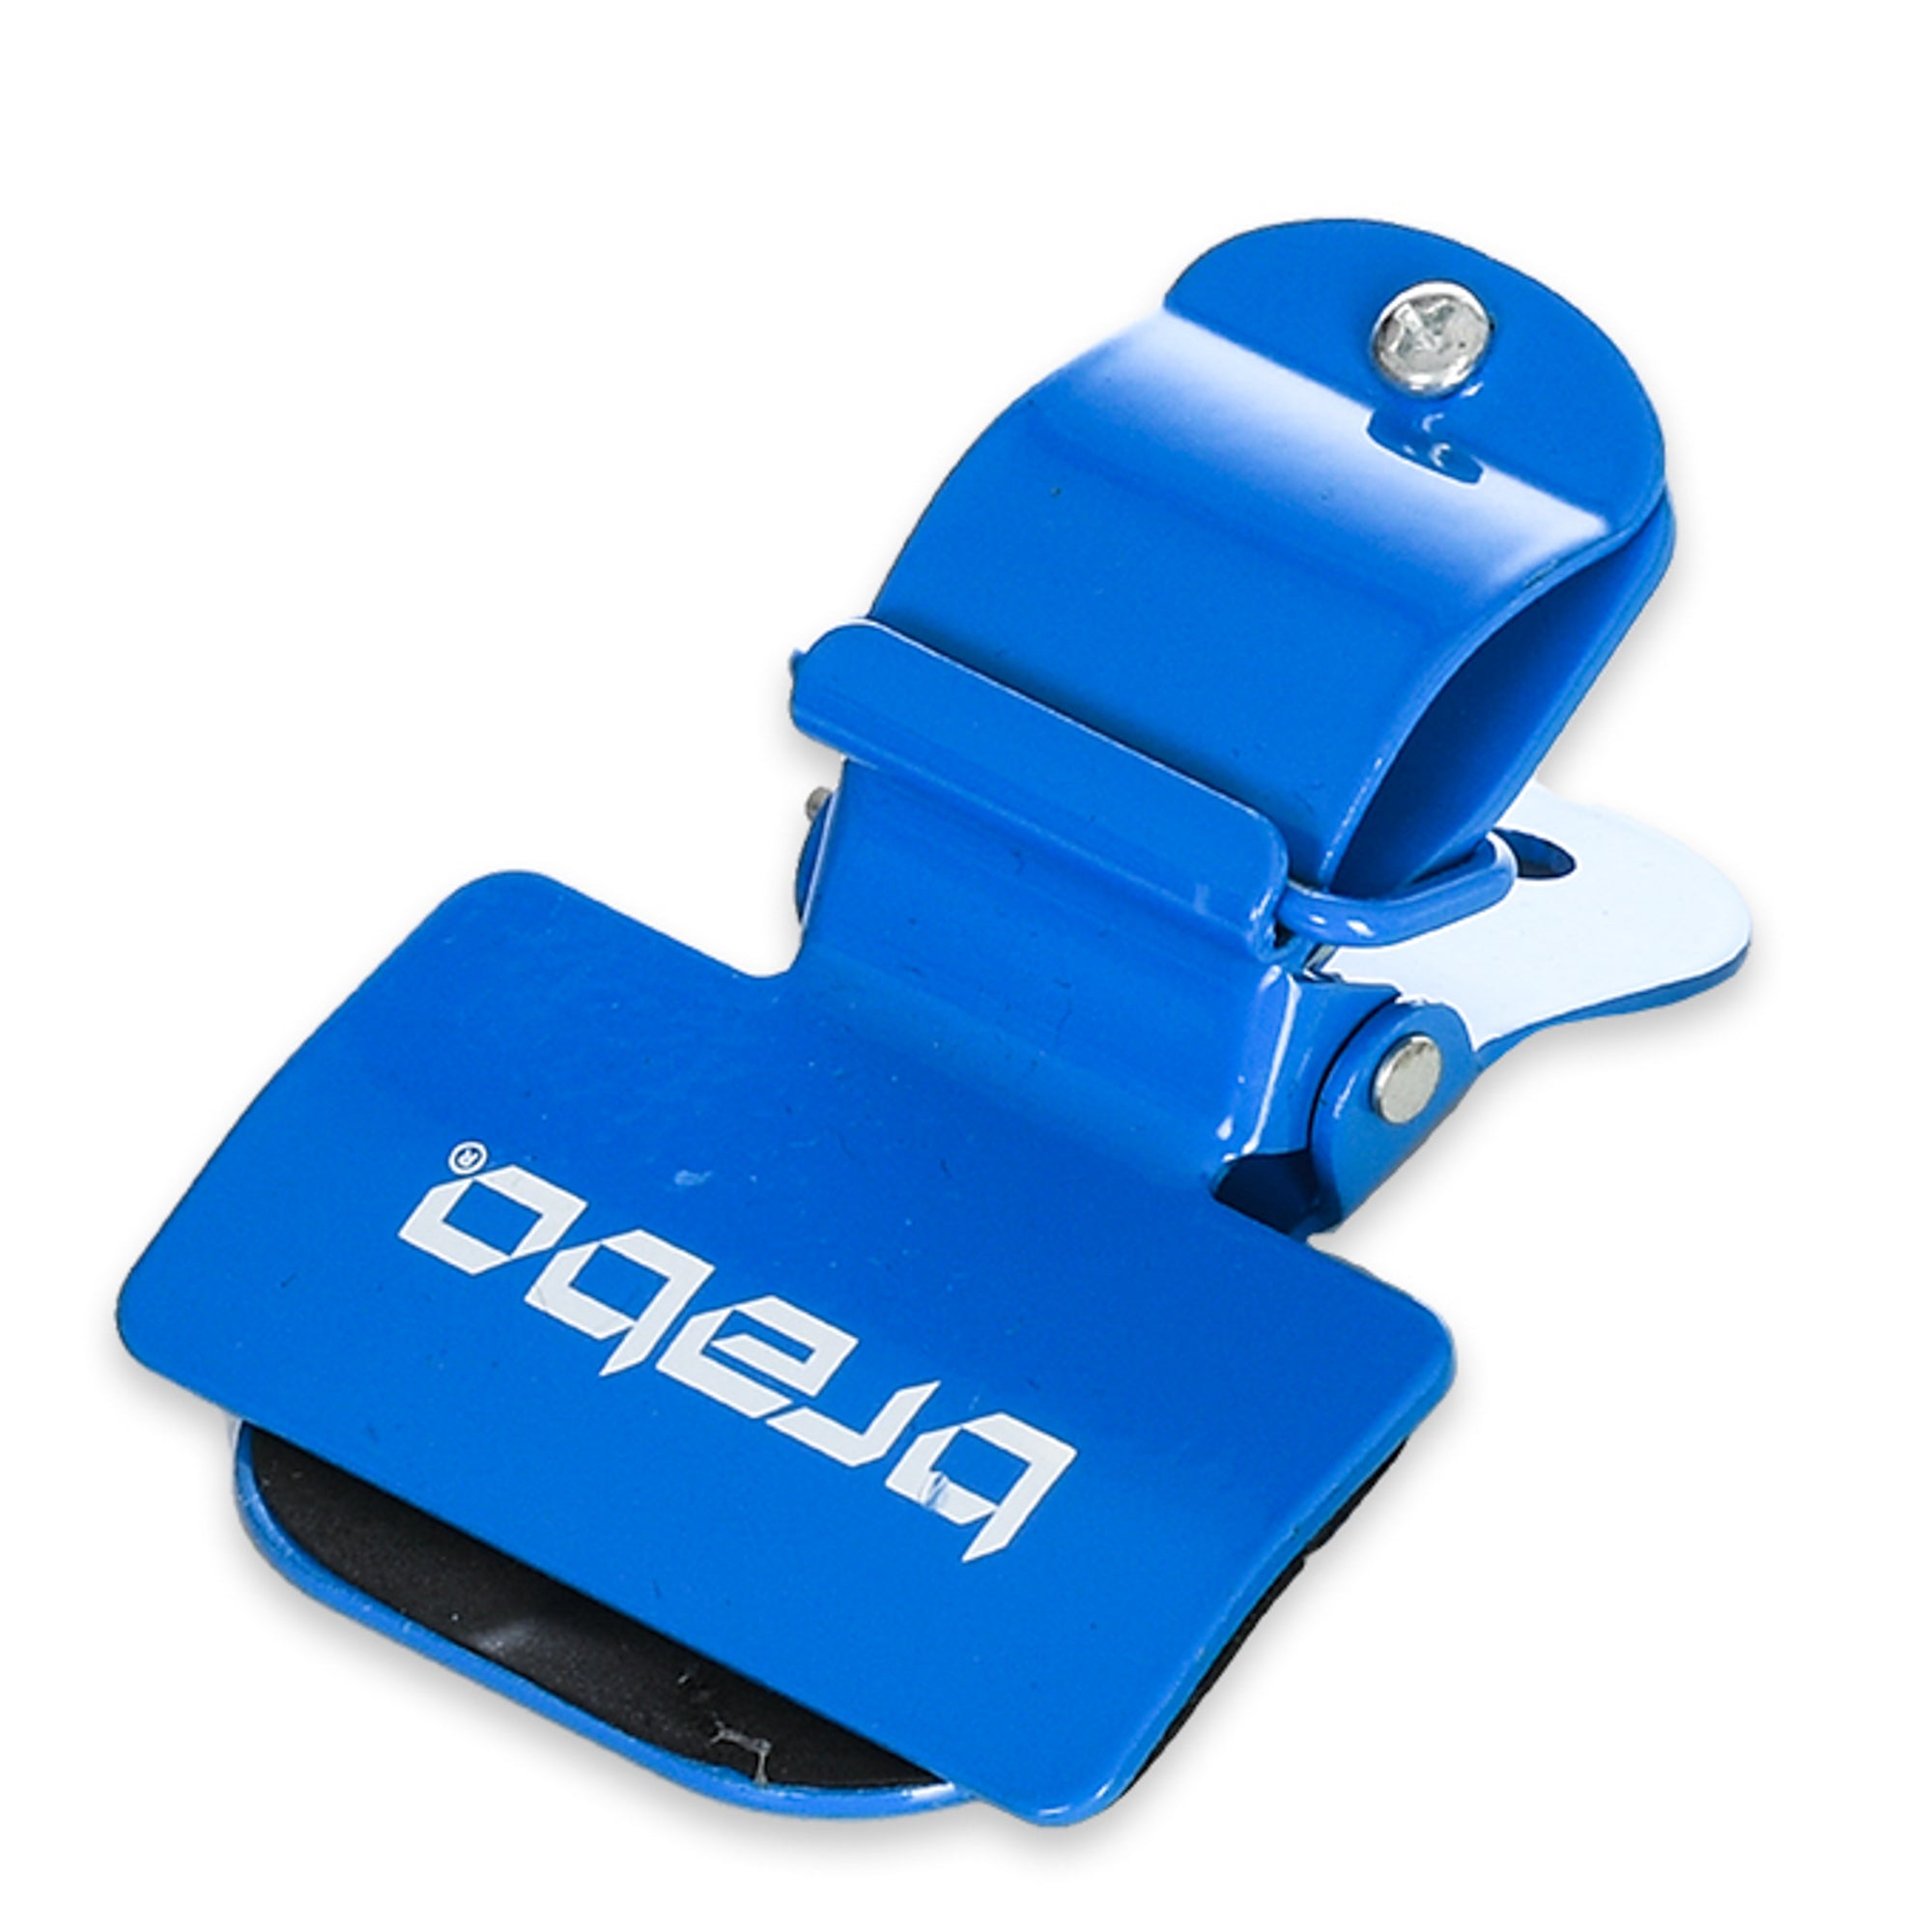 Brabo bicycle clamp